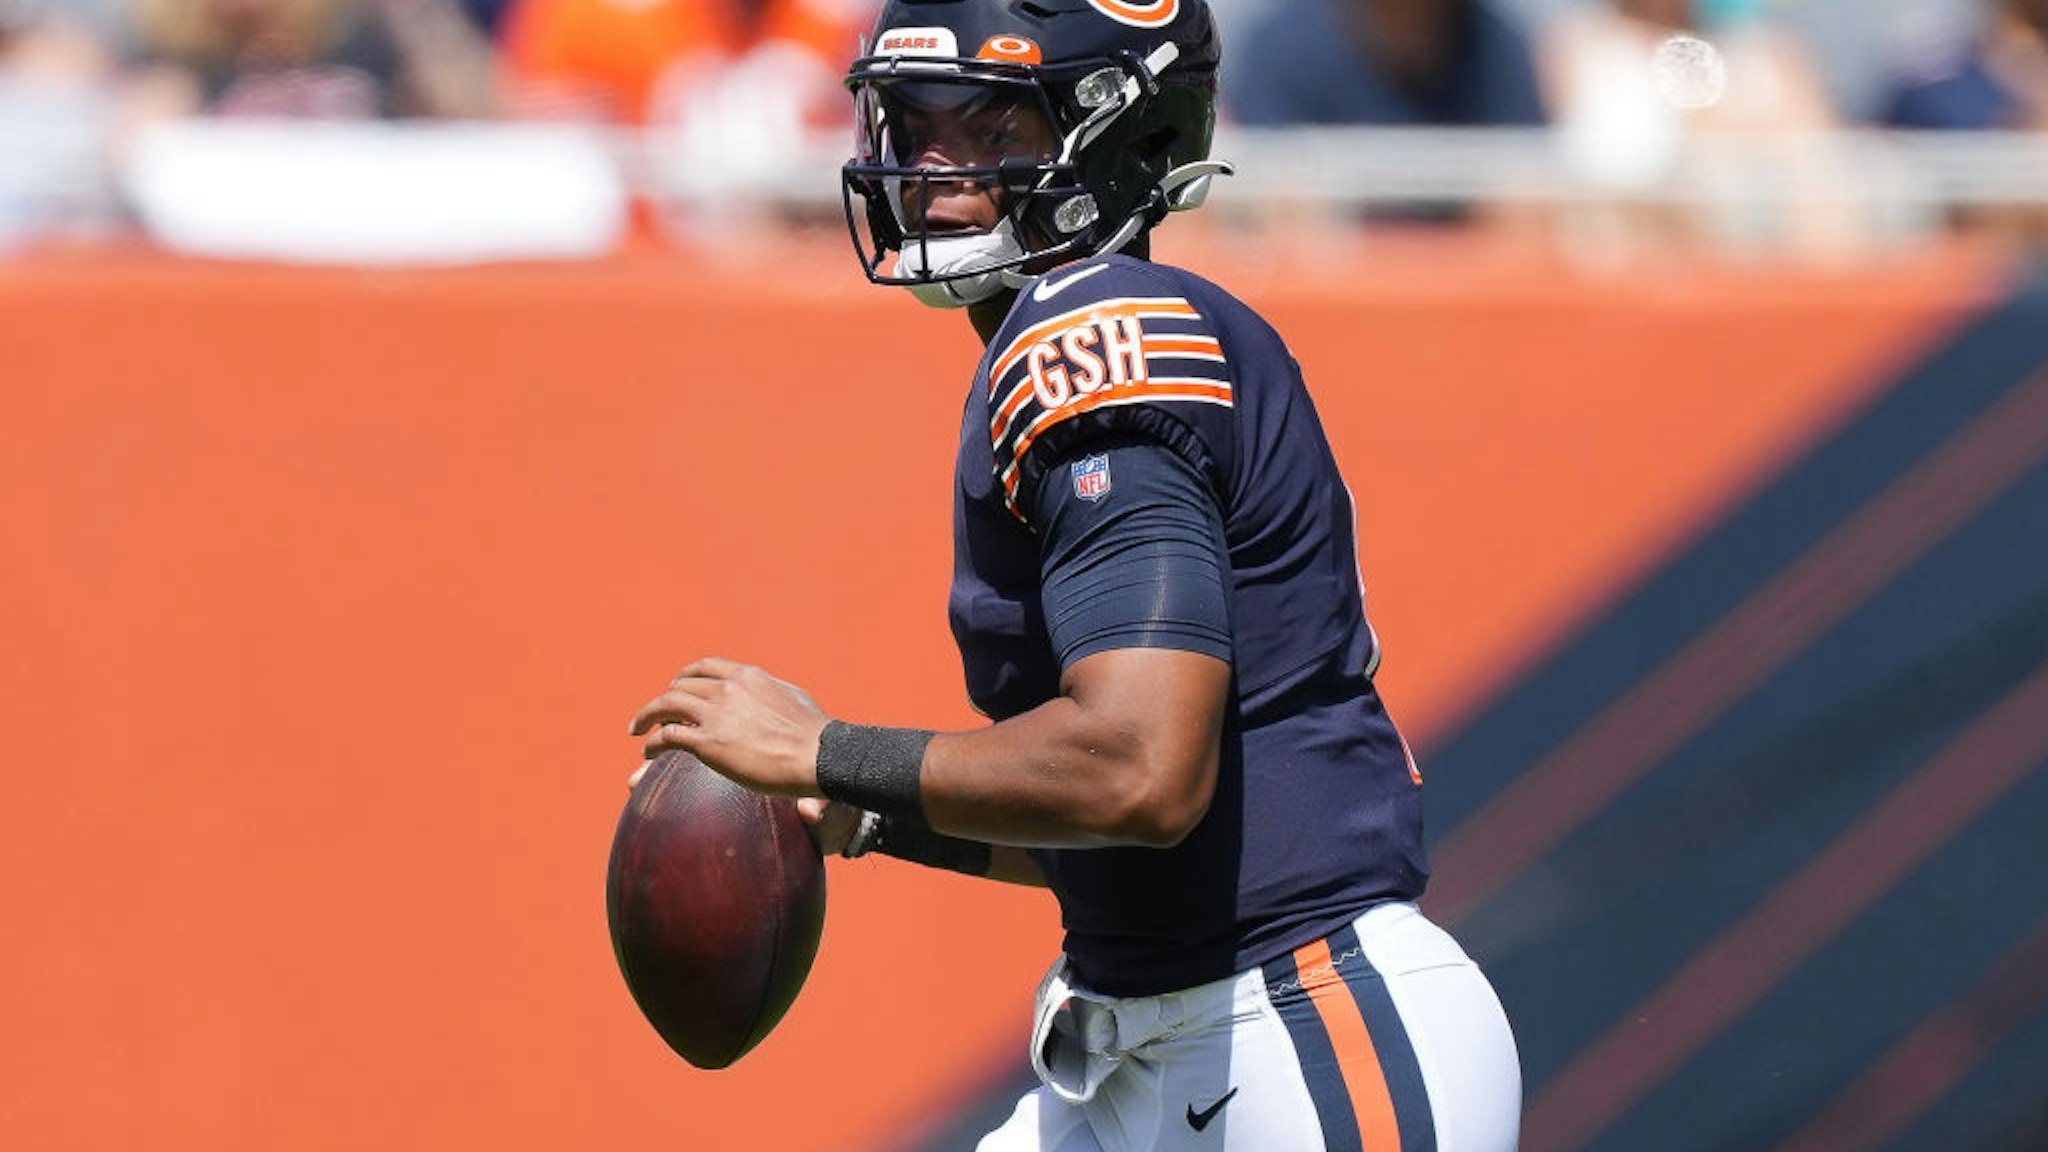 CHICAGO, IL - AUGUST 14: Chicago Bears quarterback Justin Fields (1) looks to throw the football during a preseason game between the Chicago Bears and the Miami Dolphins on August 14, 2021 at Soldier Field in Chicago, IL. (Photo by Robin Alam/Icon Sportswire via Getty Images)